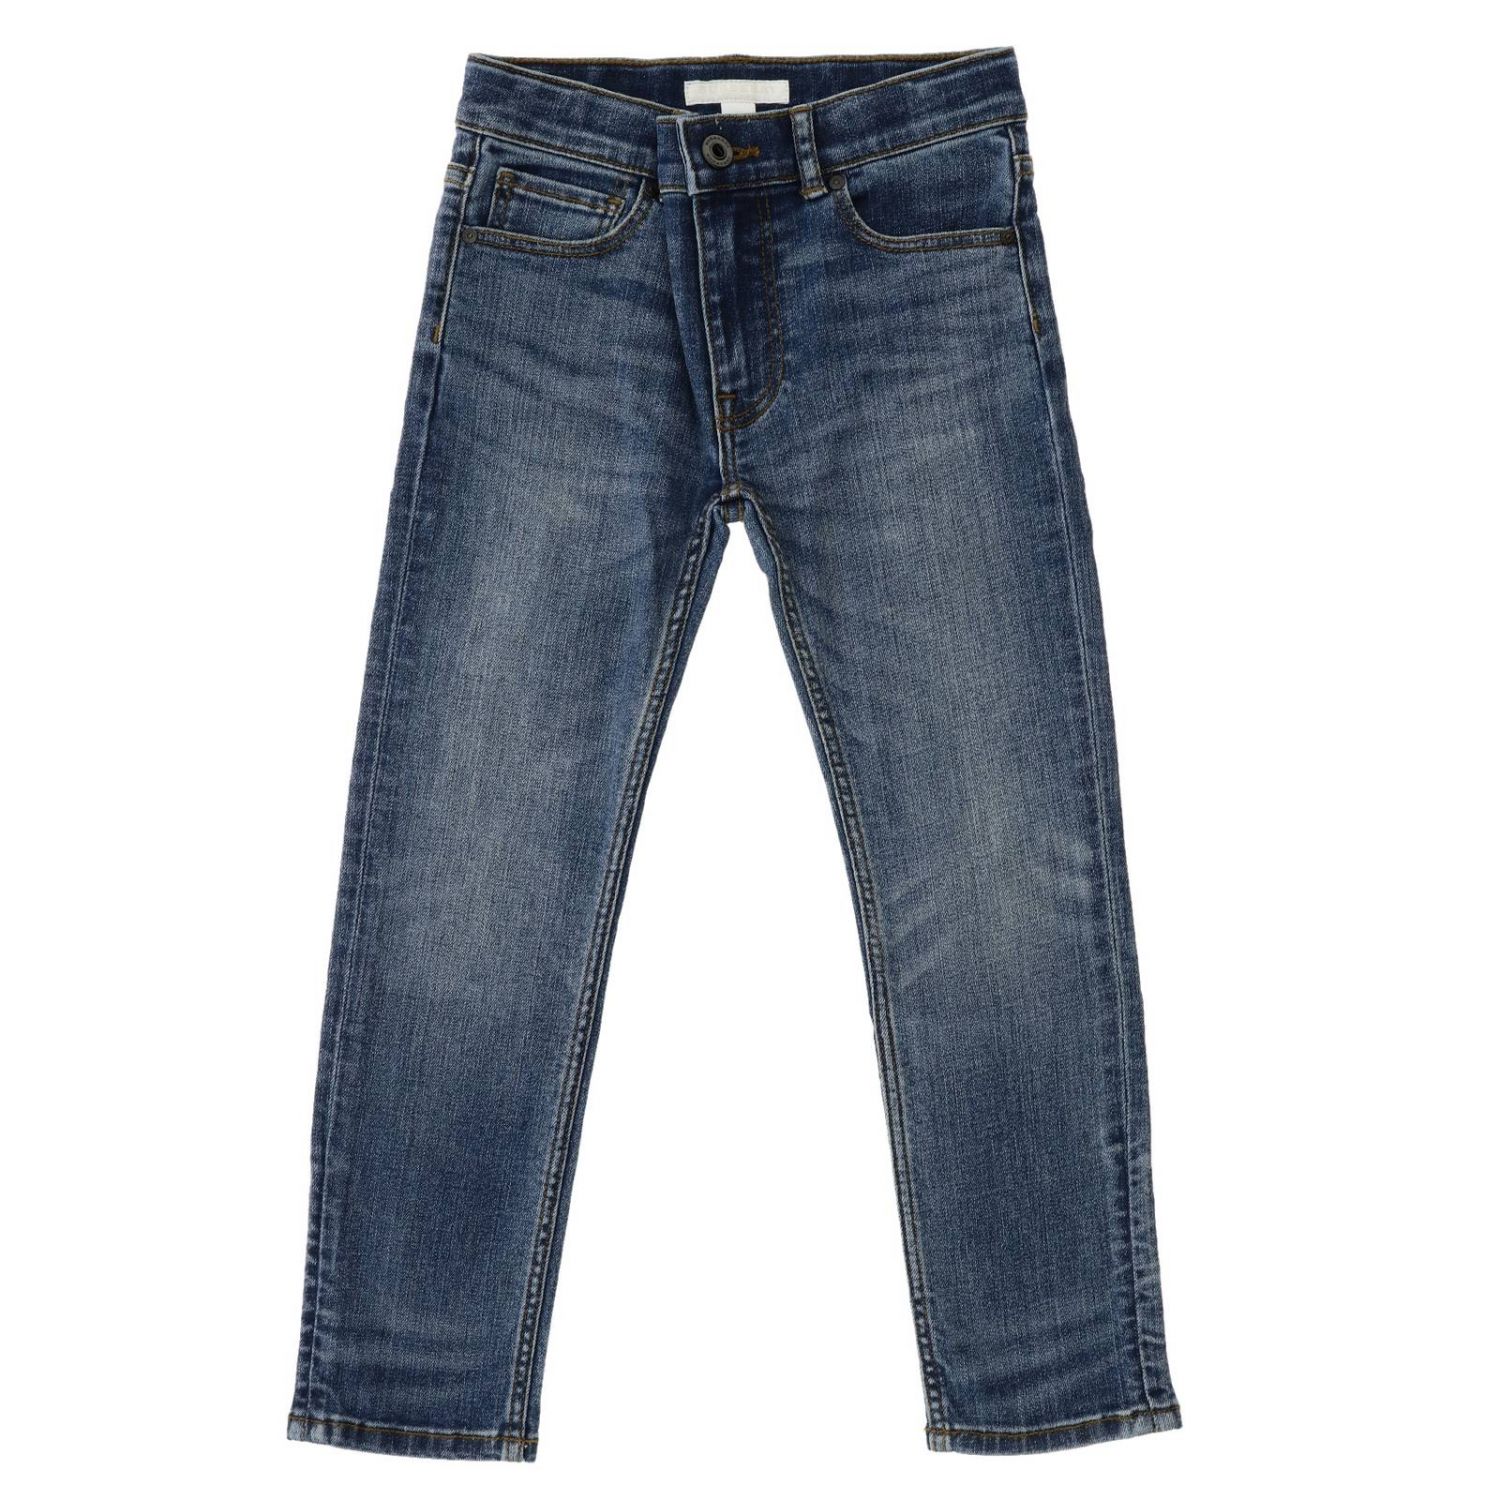 BURBERRY: jeans for boys - Blue | Burberry jeans 4063493 online at ...